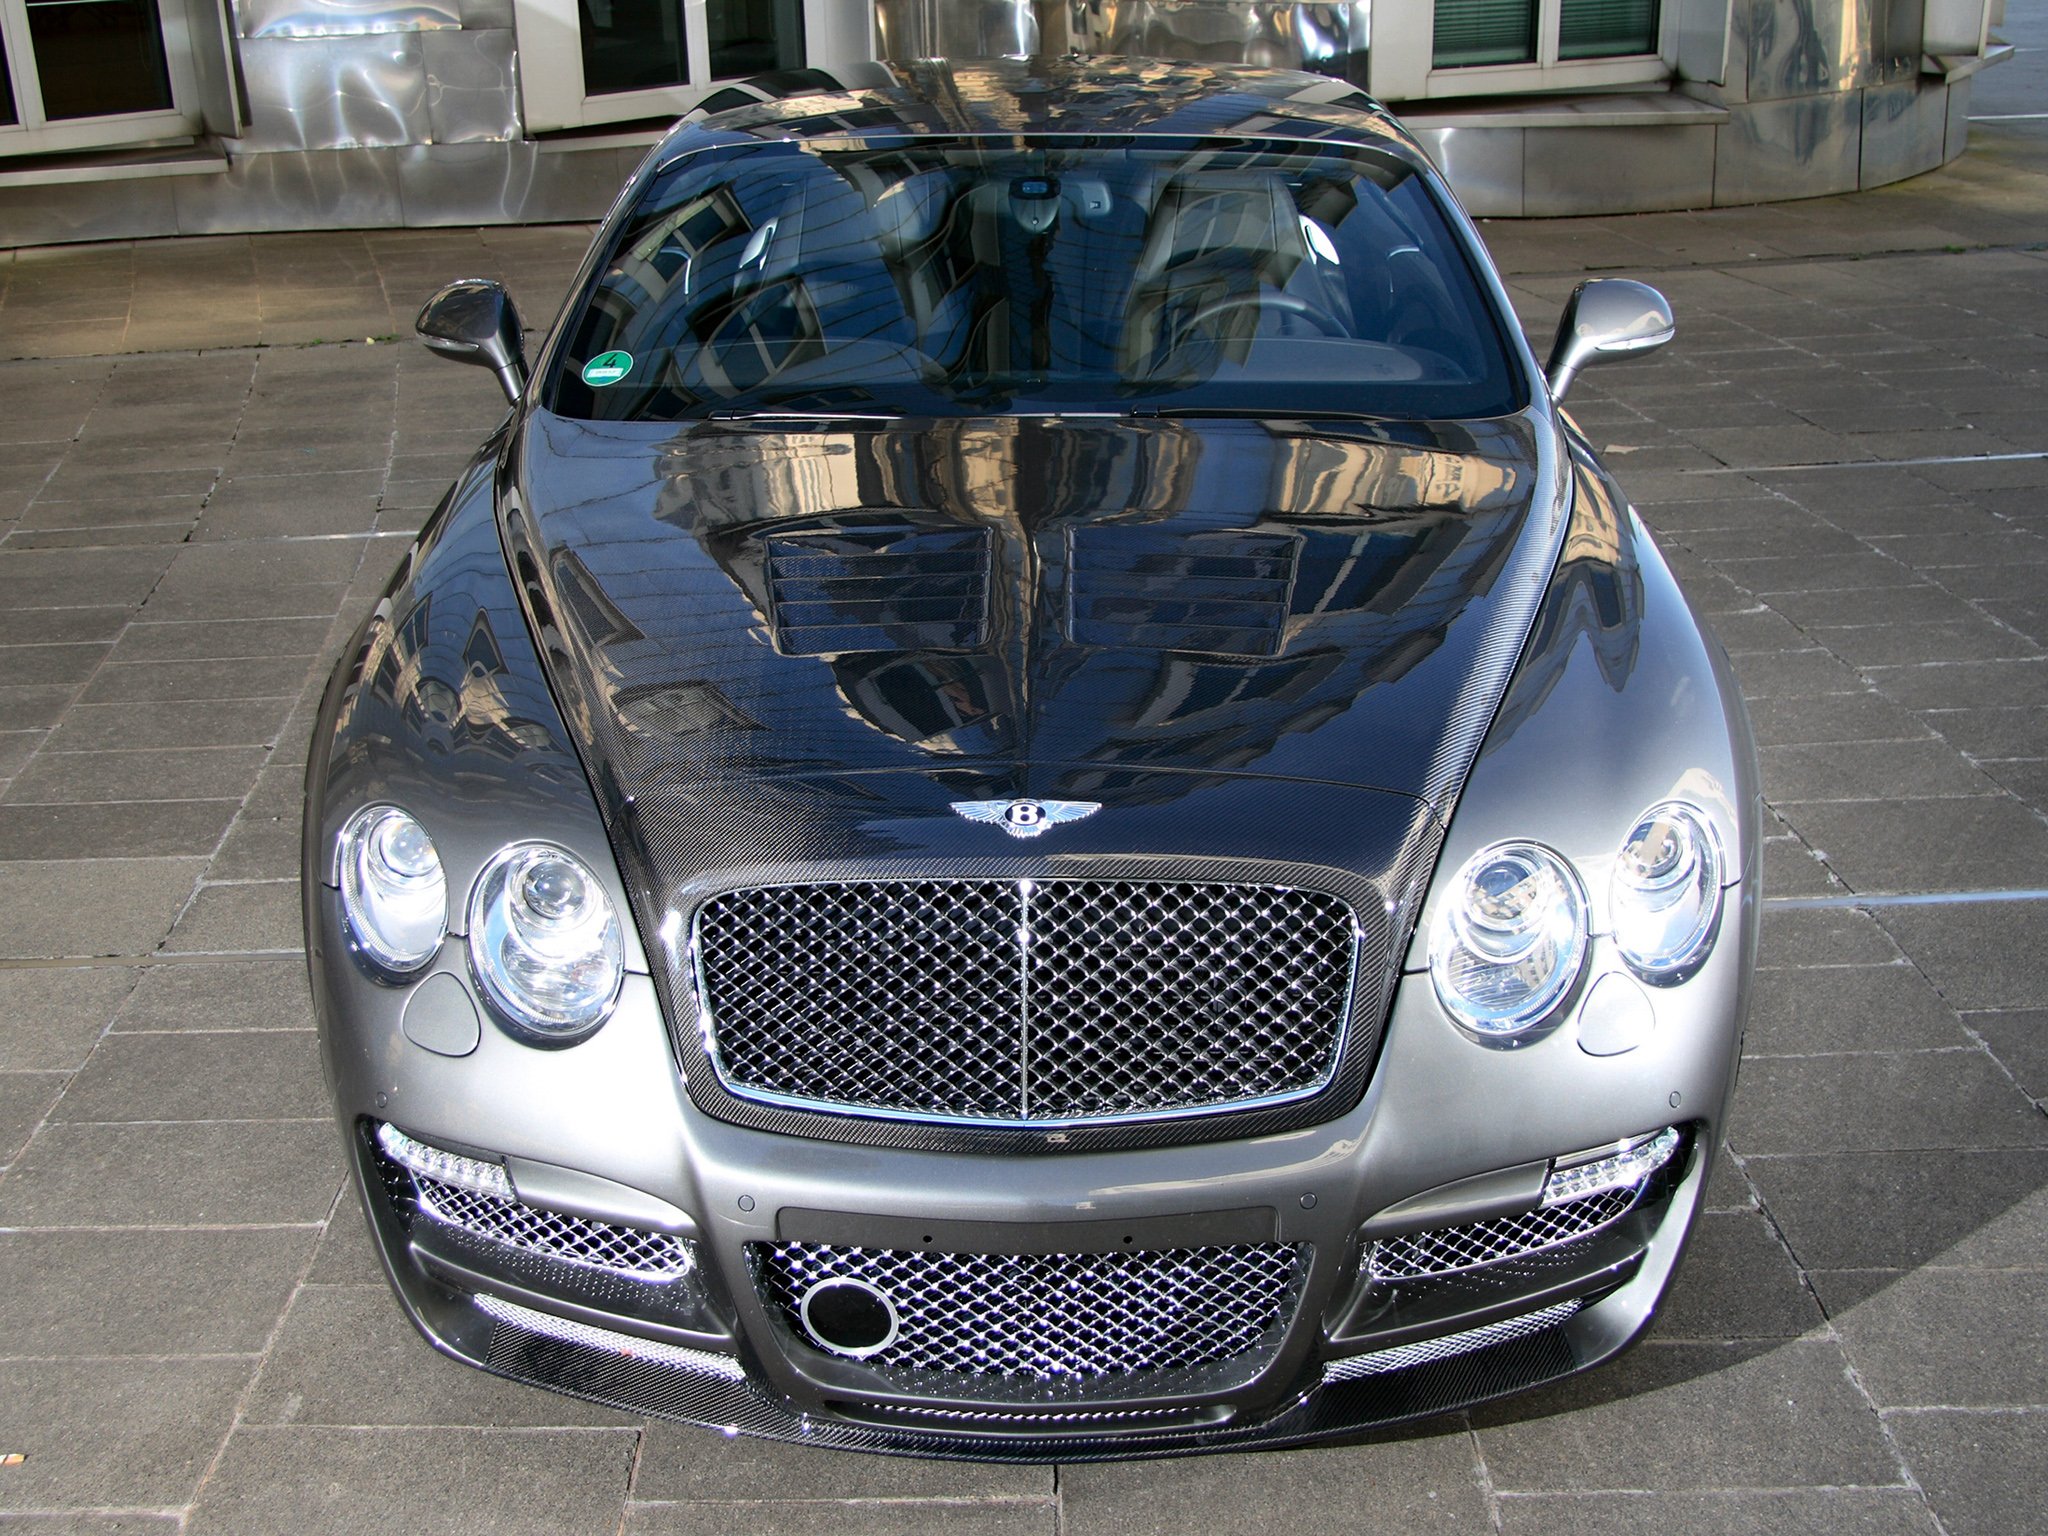 nderson, Germany, Bentley, Gt speed, Elegance, Edition, Cars, Modified, 2010 Wallpaper